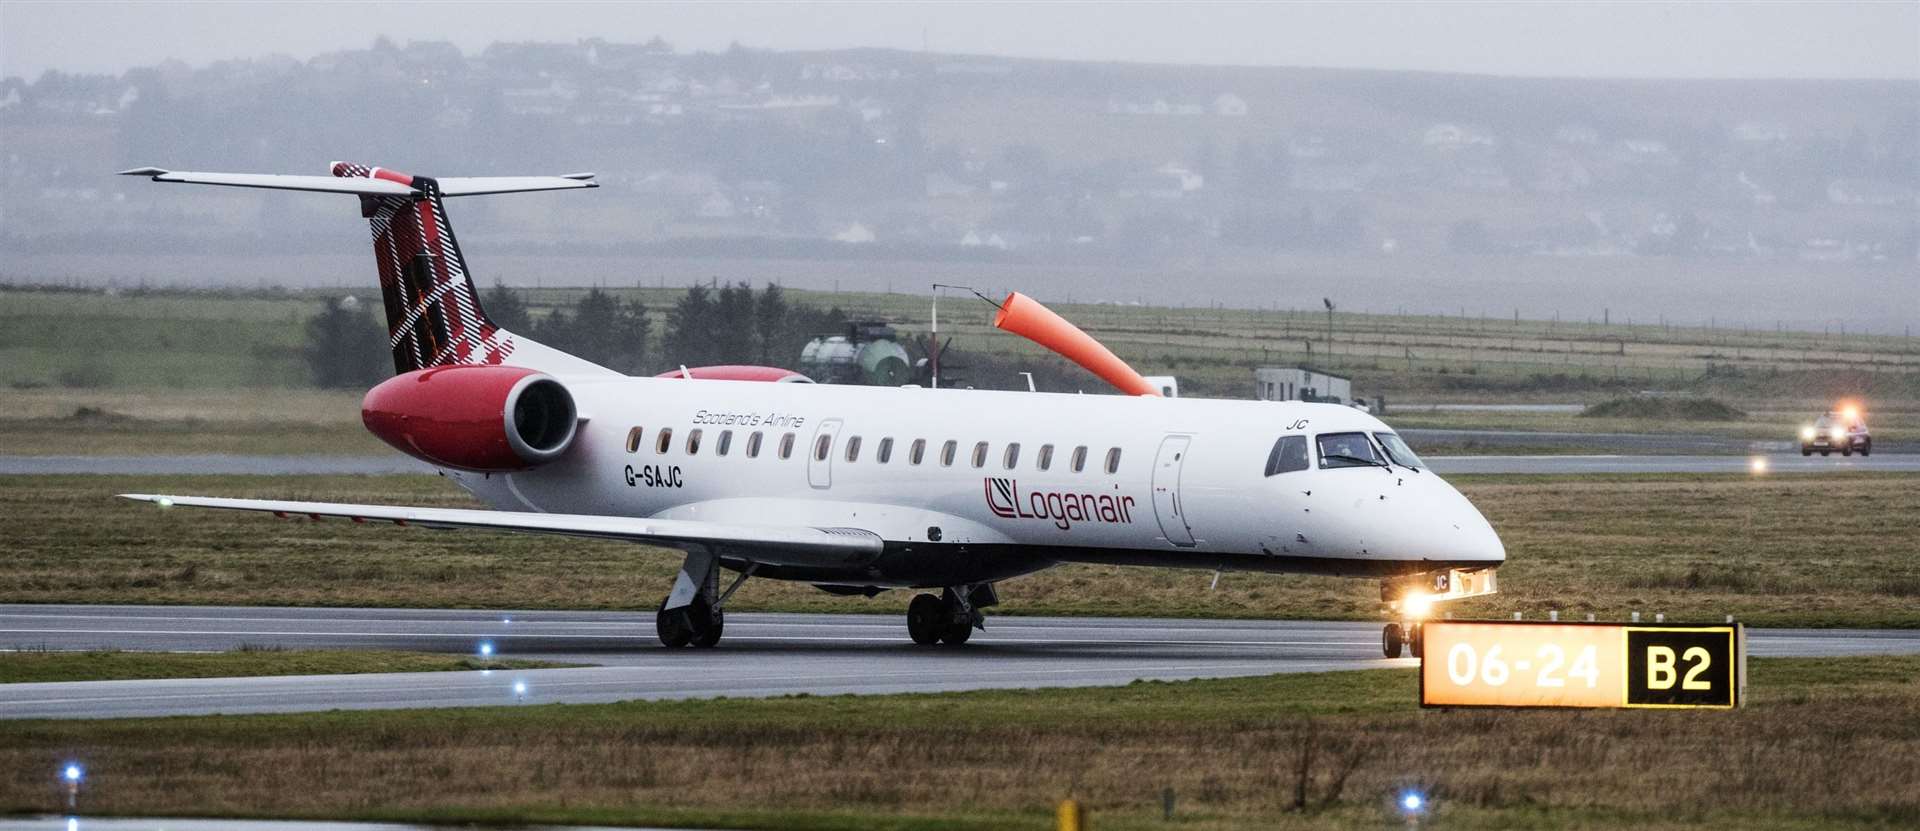 Loganair Embraer 145 serving the new Inverness-East Midlands route.